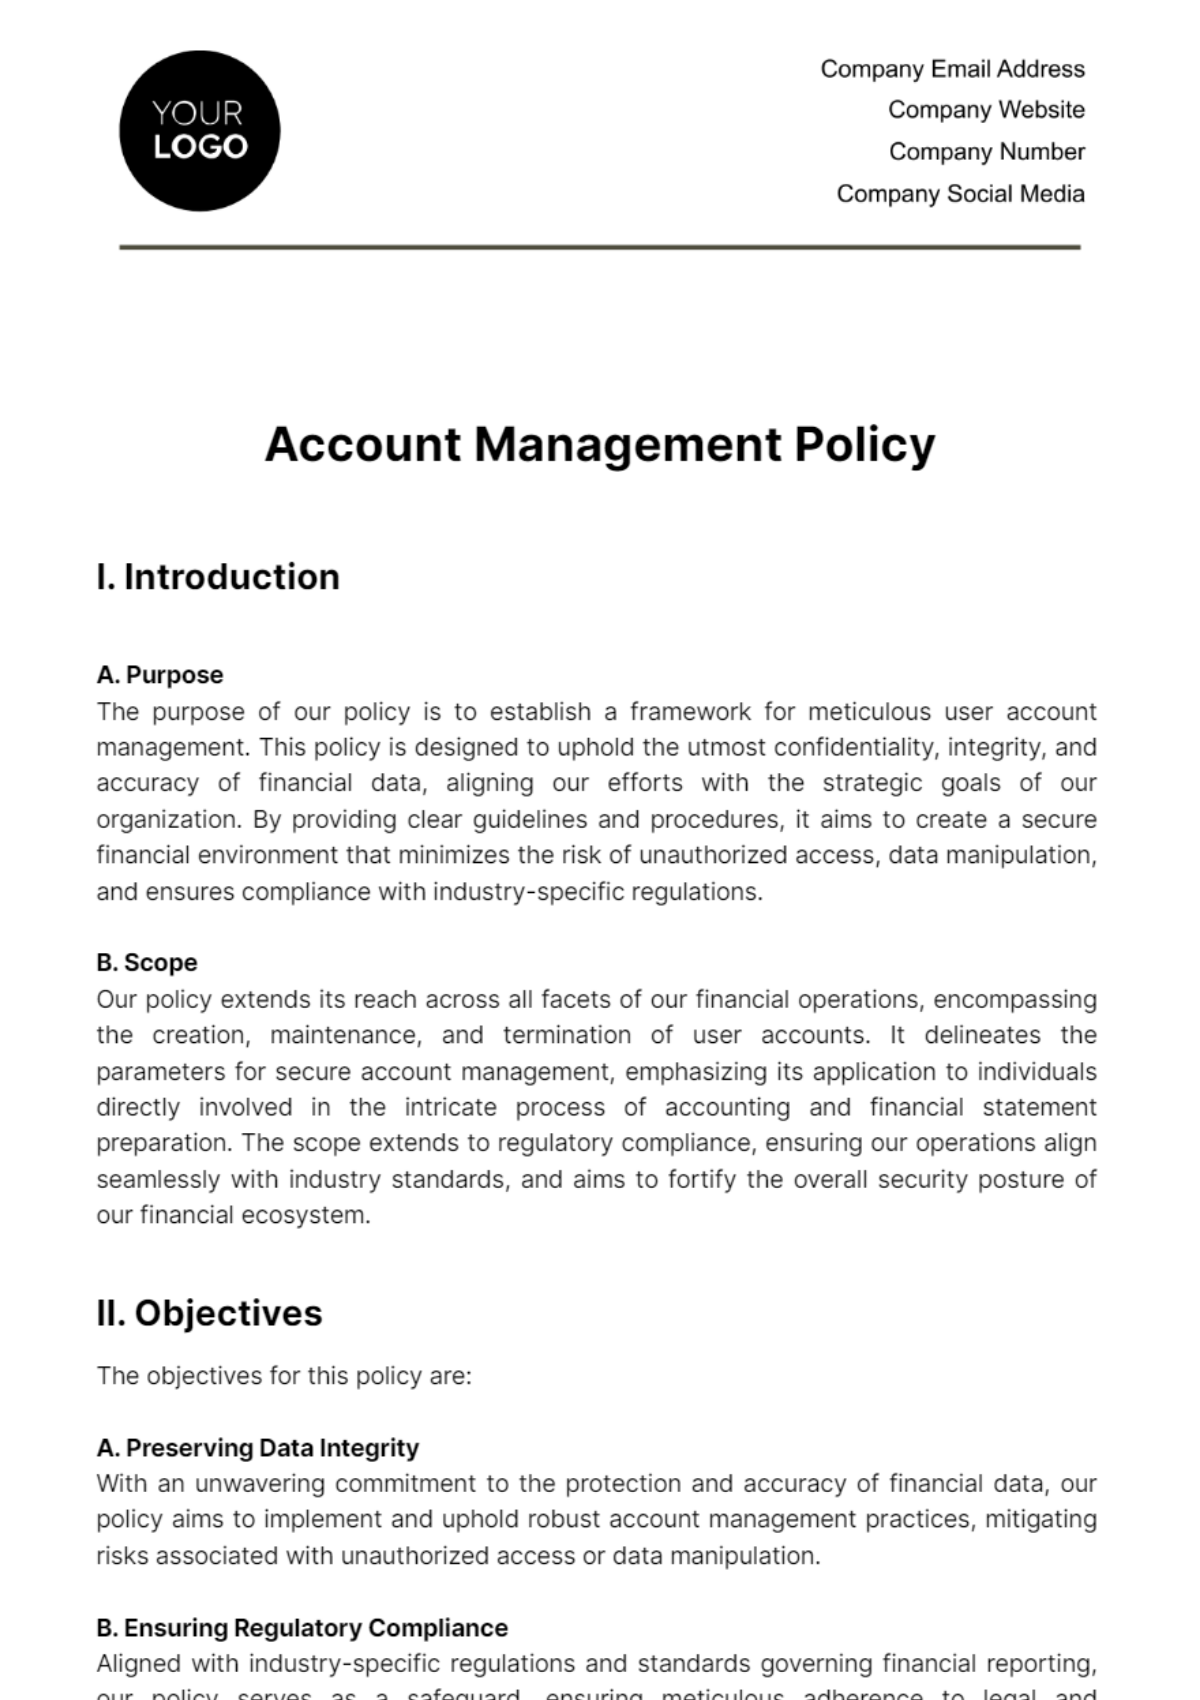 Account Management Policy Template